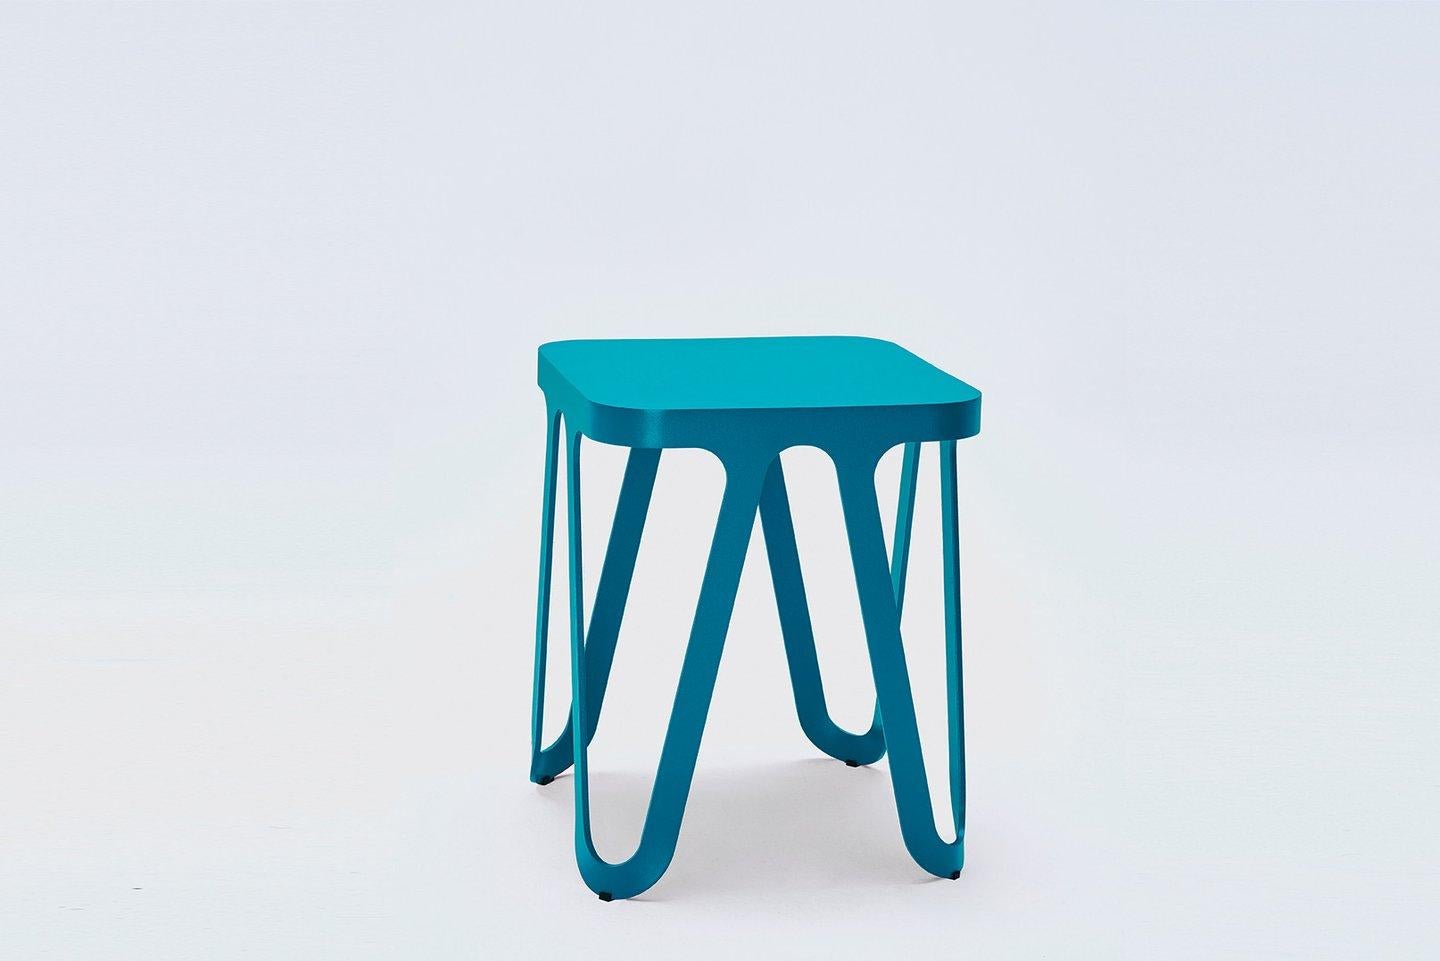 Grey loop stool by Sebastian Scherer
Material: aluminium
Dimensions: 38 x 38 x 44 cm
Also available in wood
Colour: quartz grey
Also available in ocean blue, silk grey, jet black, coral red, lemon yellow, rose, signal white

The Loop series